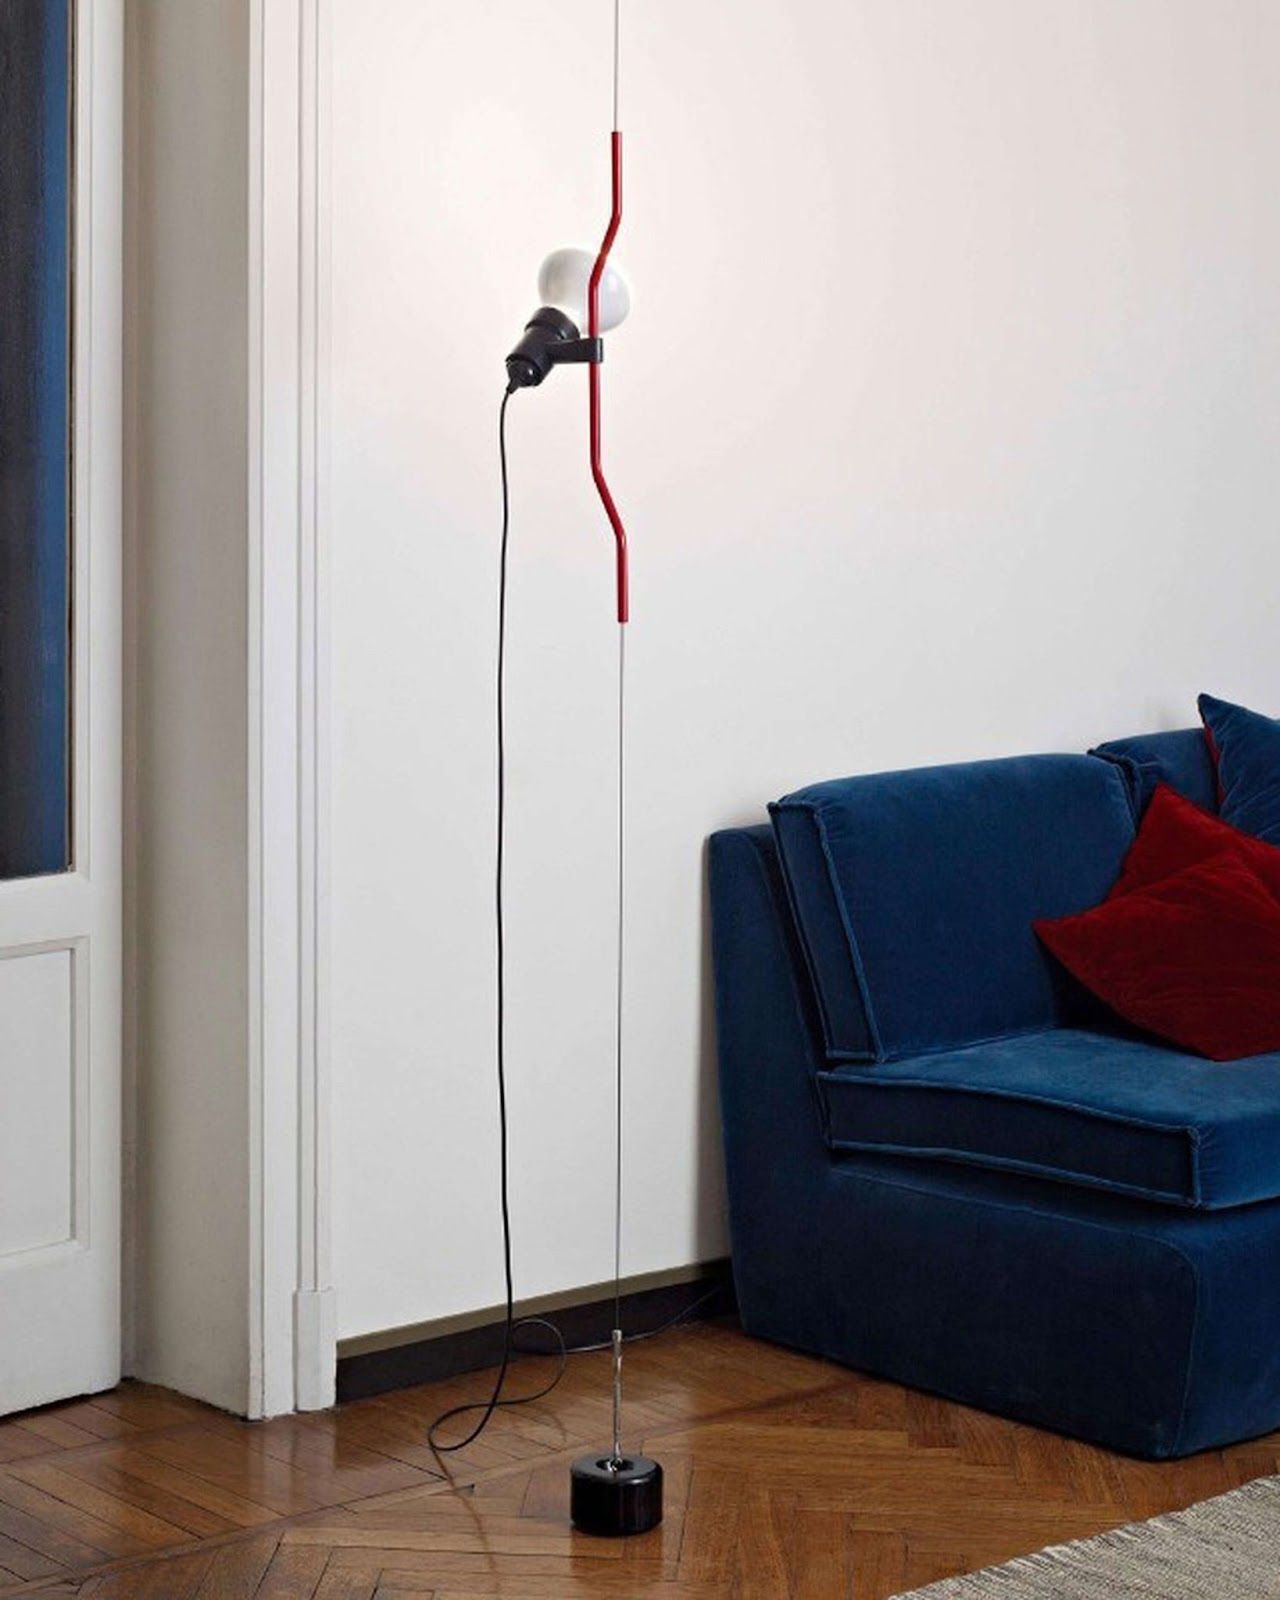 Prentesi is a ceiling lamp designed by Achille Castiglioni and Pio Manzu offered by Peverelli